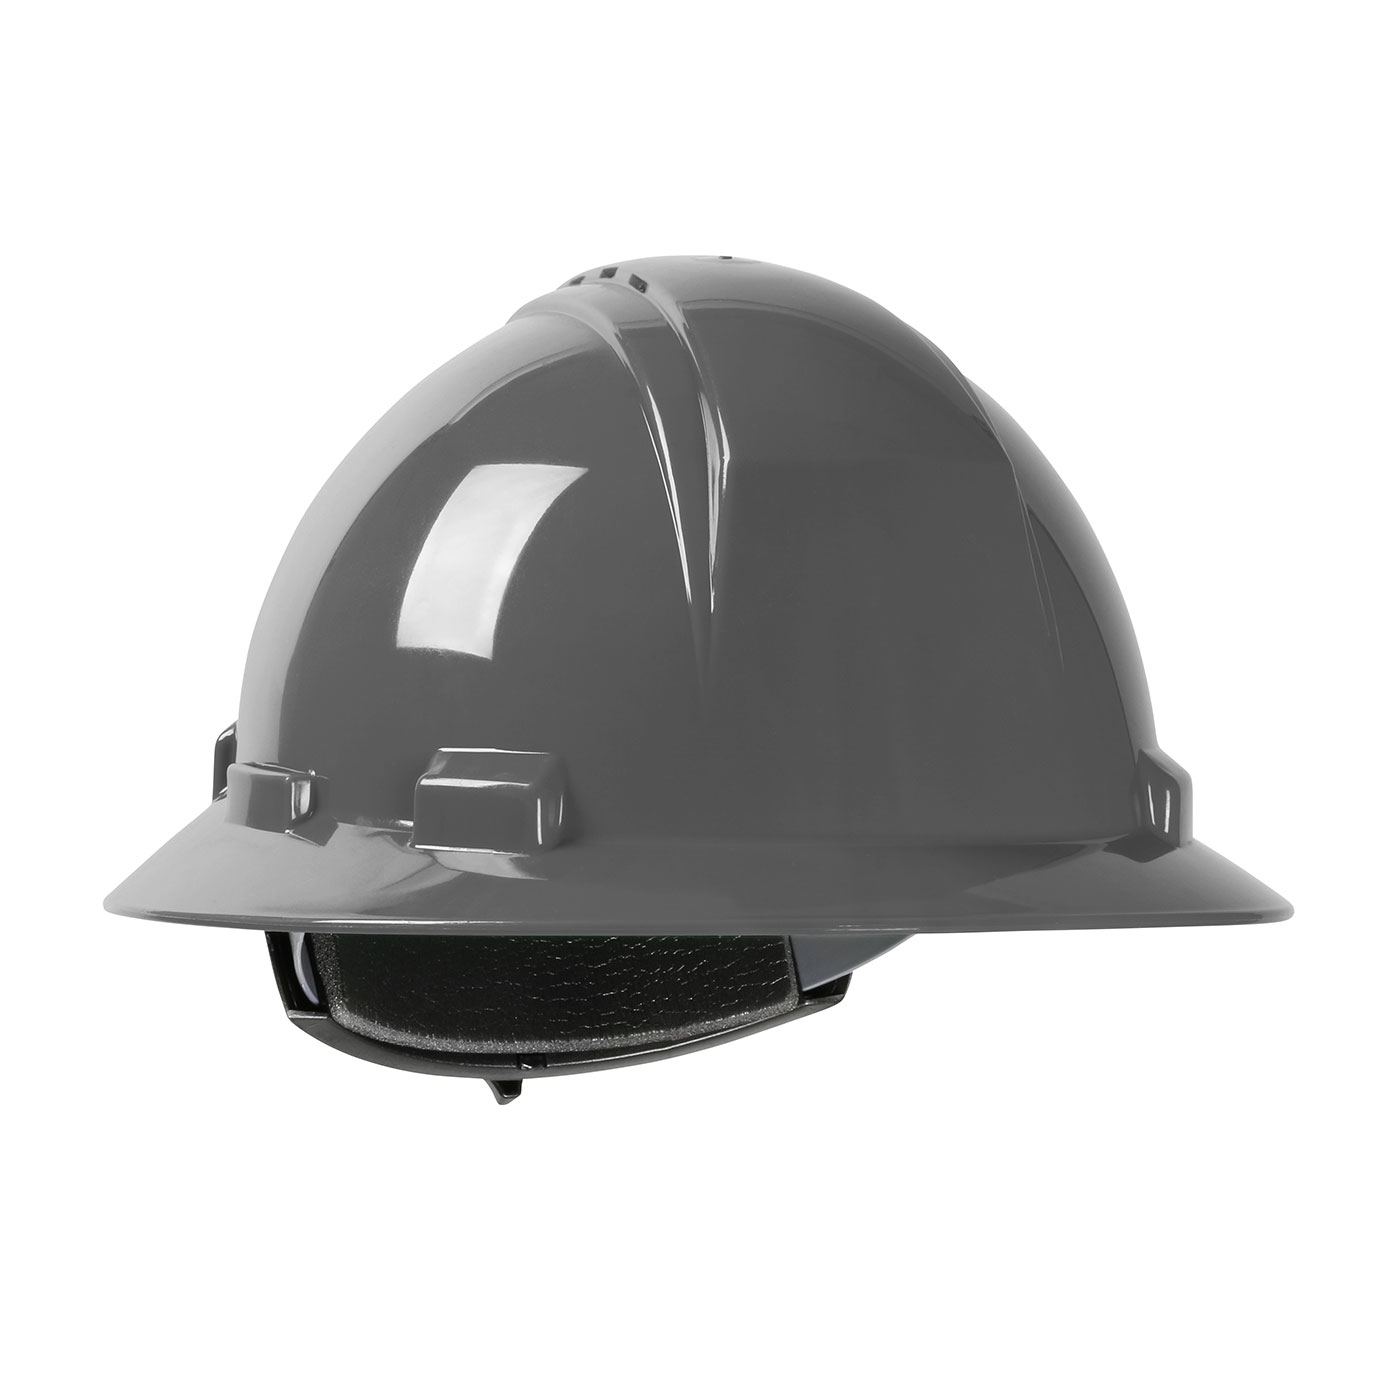 280-HP261RV PIP® Dynamic Kilimanjaro™ Vented Full Brim Hard Hat with HDPE Shell, 4-Point Textile Suspension and Wheel Ratchet Adjustment - Dark Gray